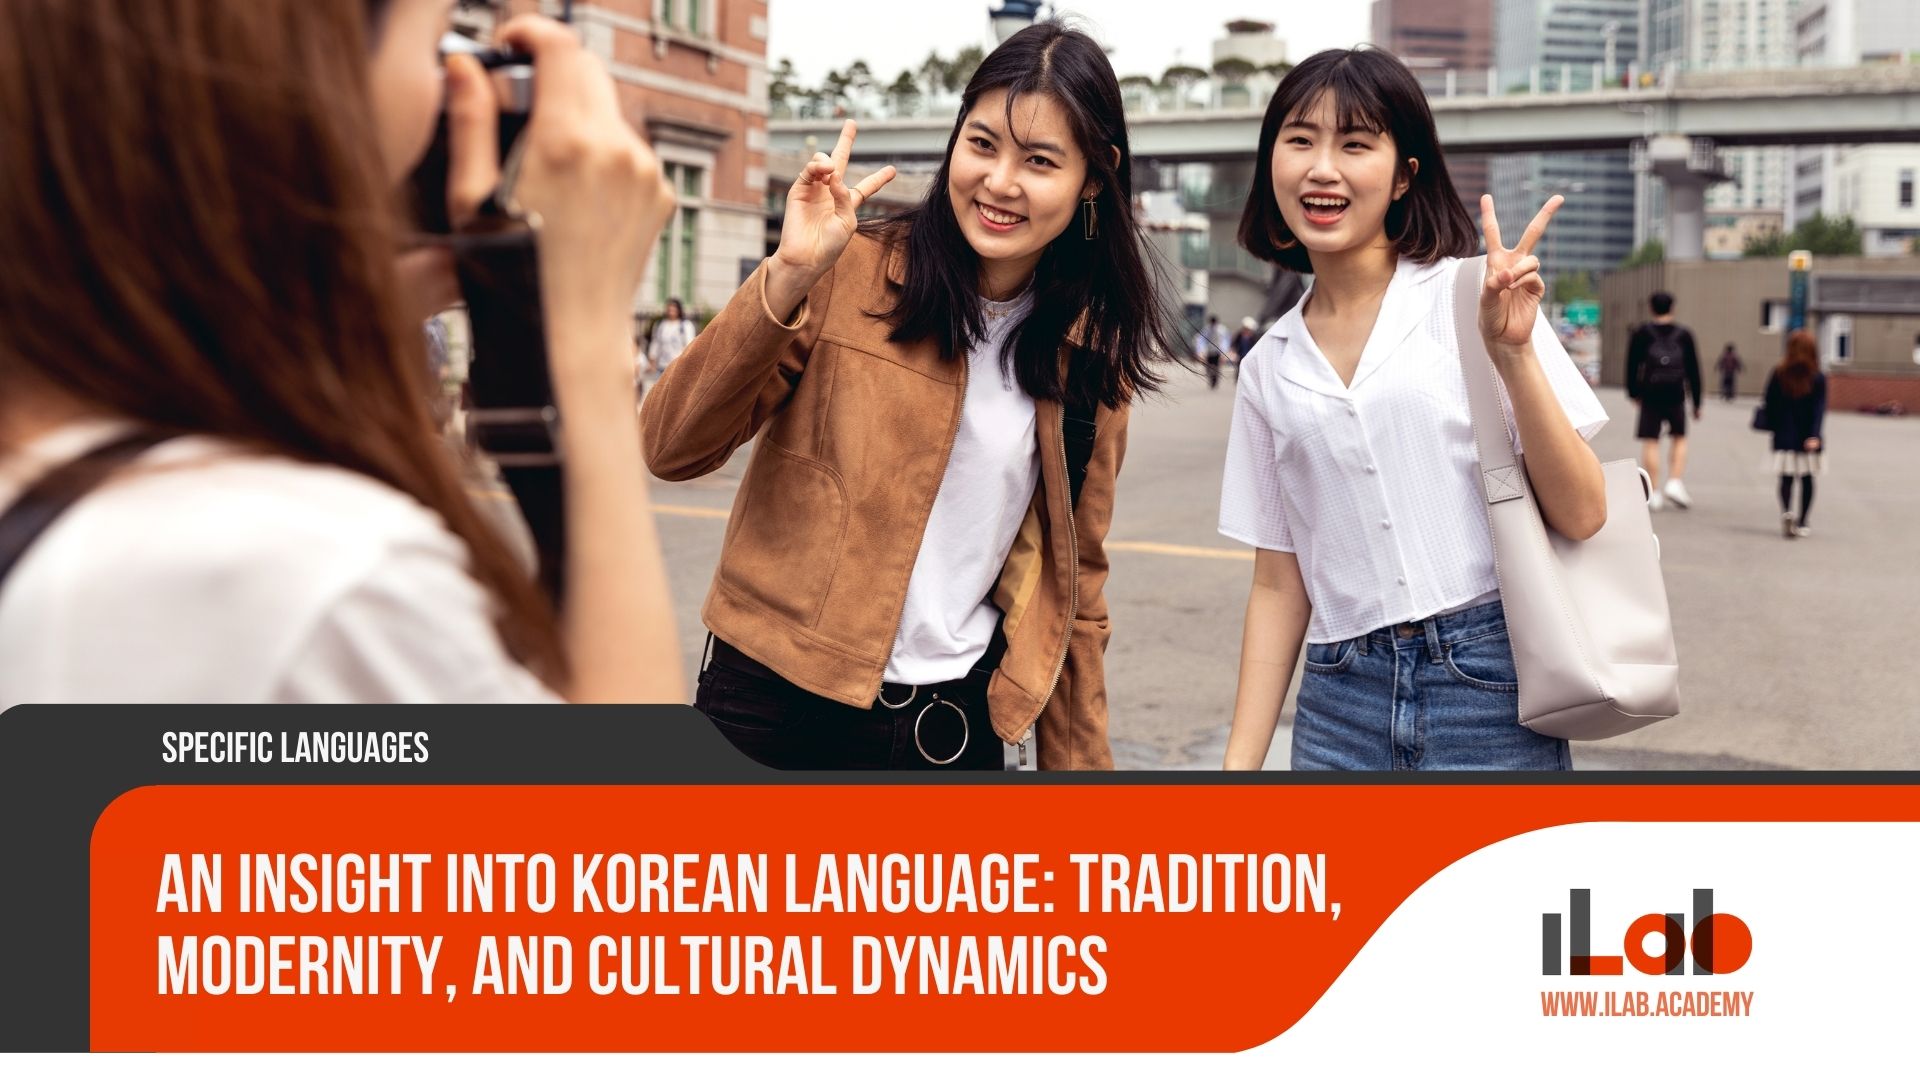 An Insight Into Korean Language: Tradition, Modernity, and Cultural Dynamics